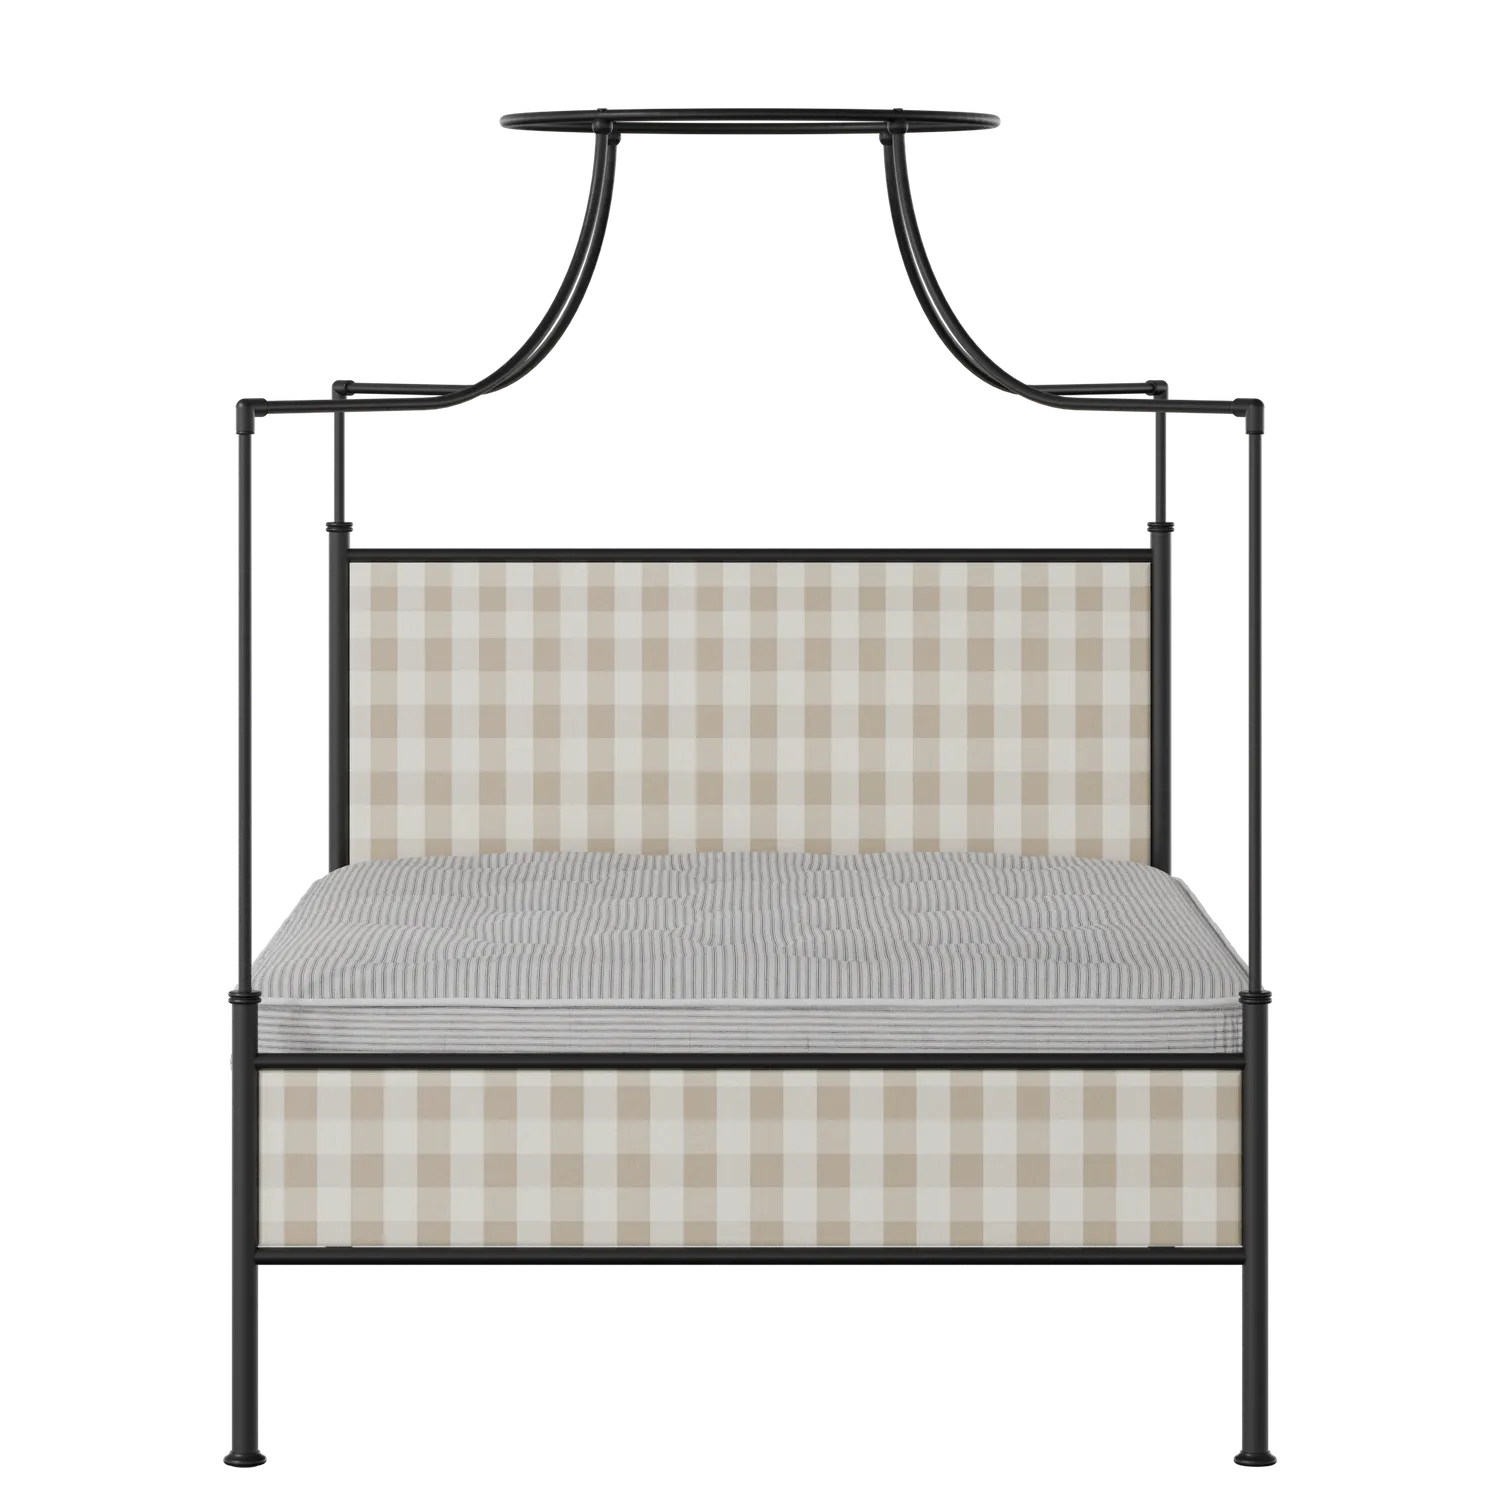 Waterloo Slim iron/metal upholstered bed in black with Romo Kemble Putty fabric